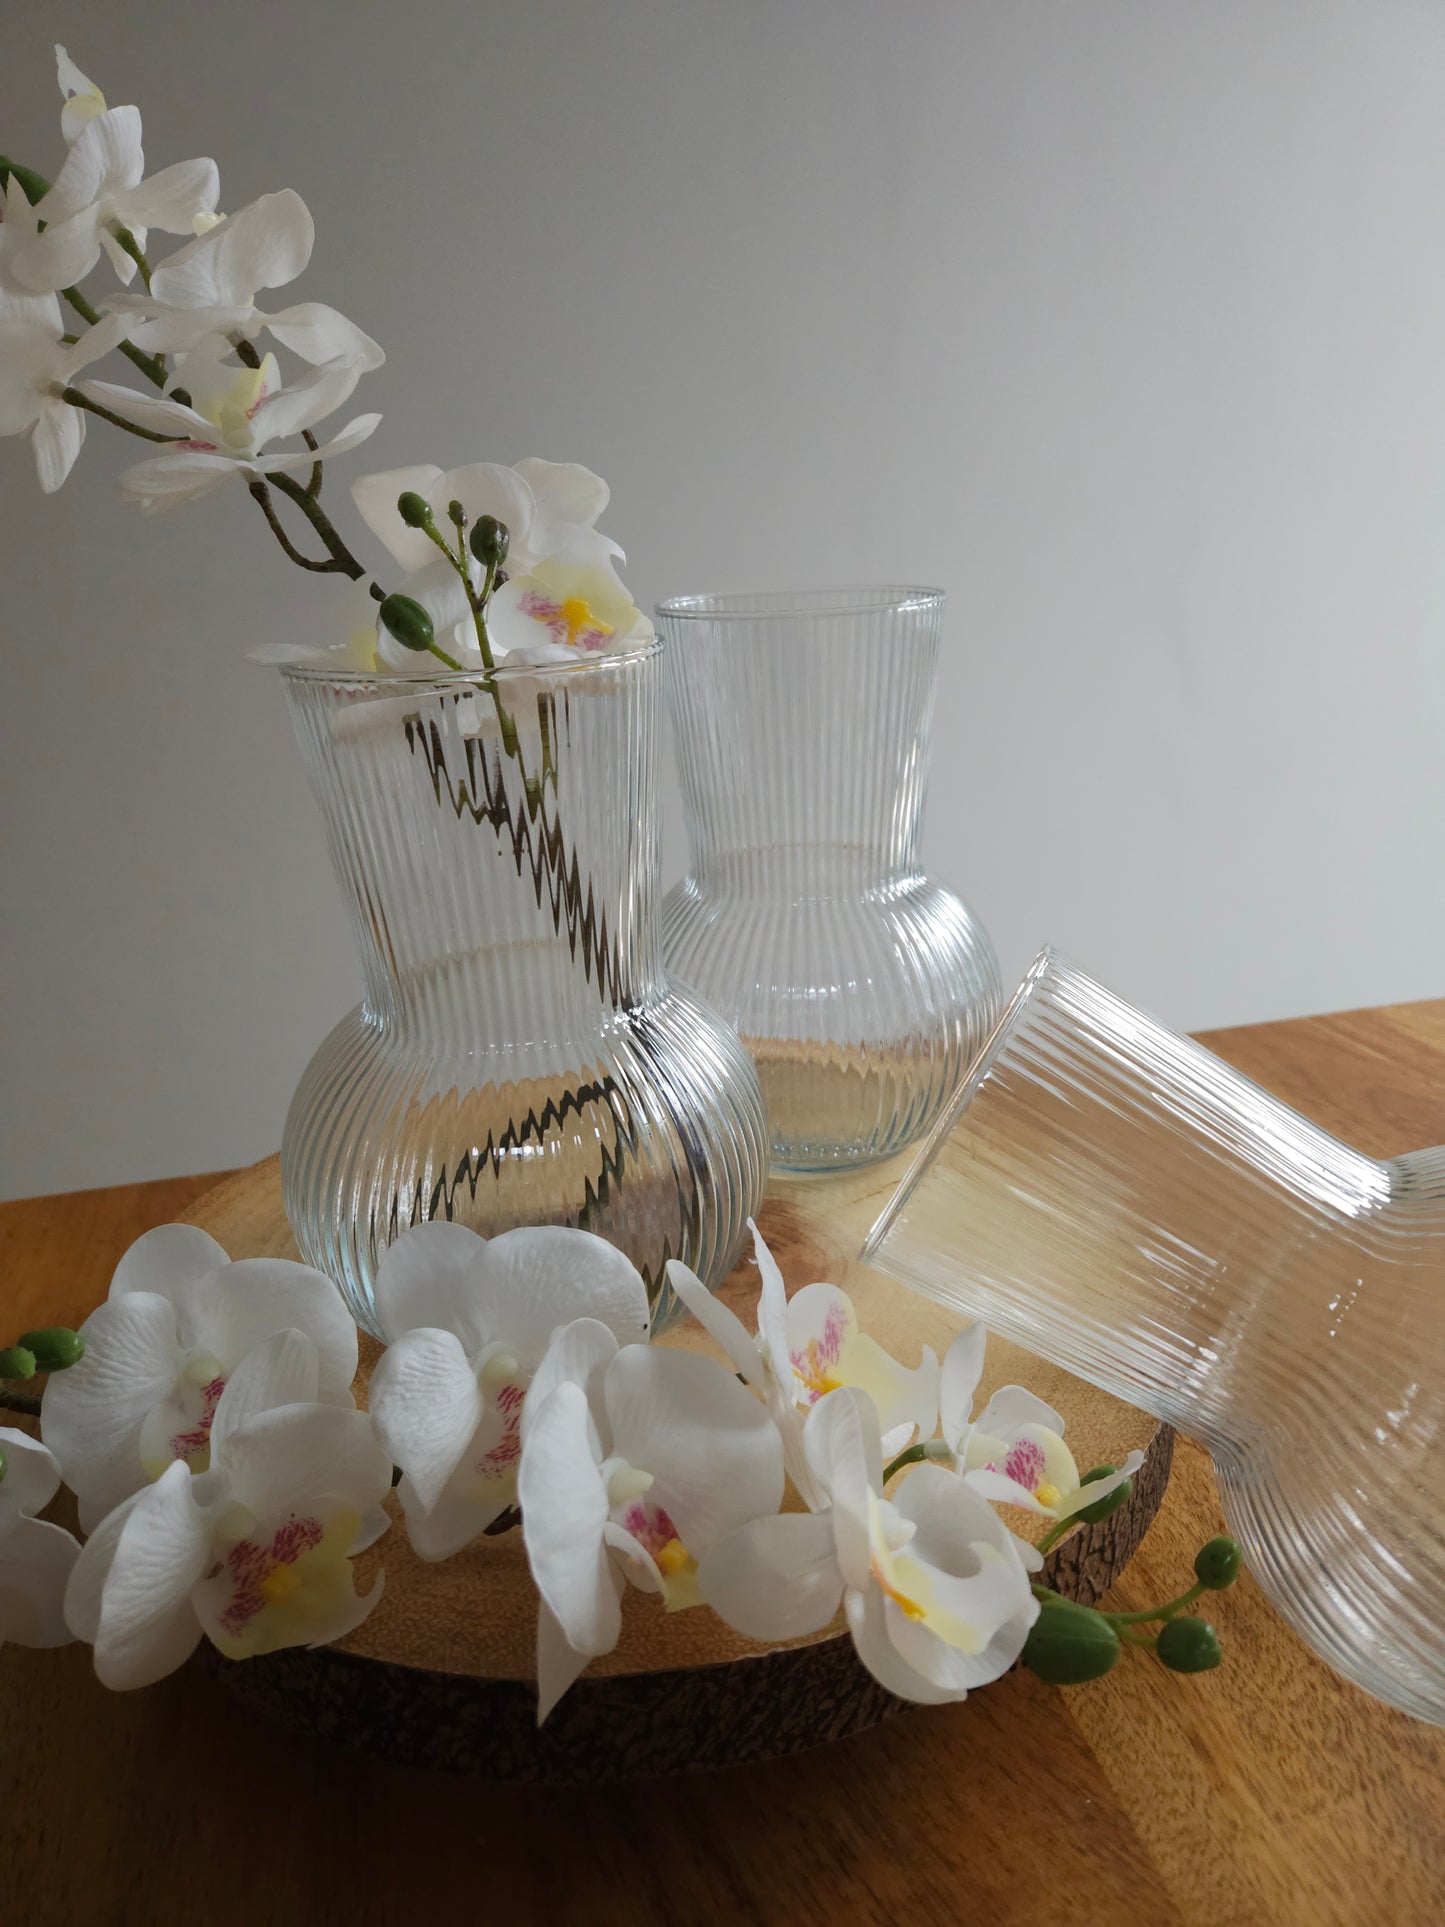 Clear Ribbed Glass Vase